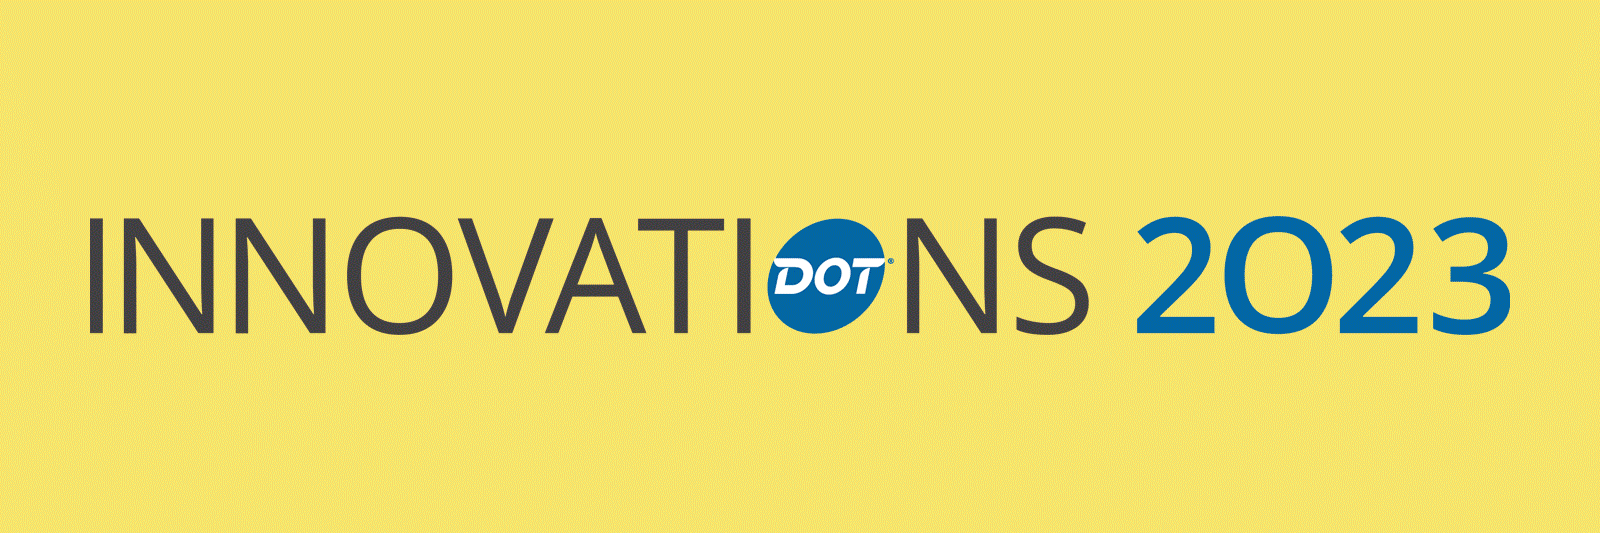 Rotating images of the Innovations logo, food combinations, and images from the trade show.